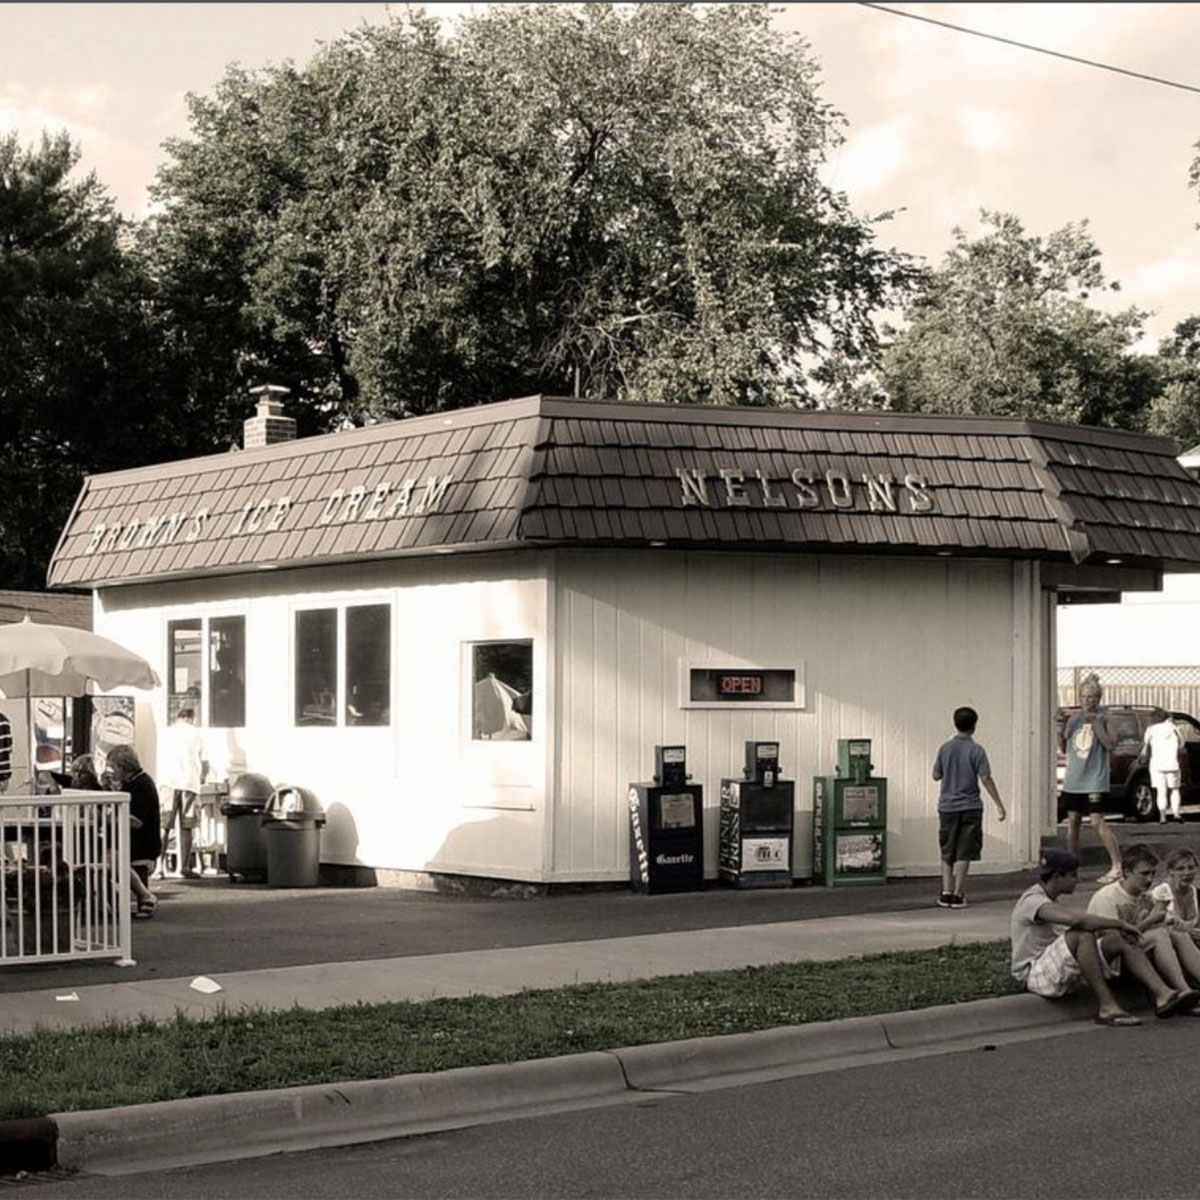 Brown's Ice Cream Over the Years